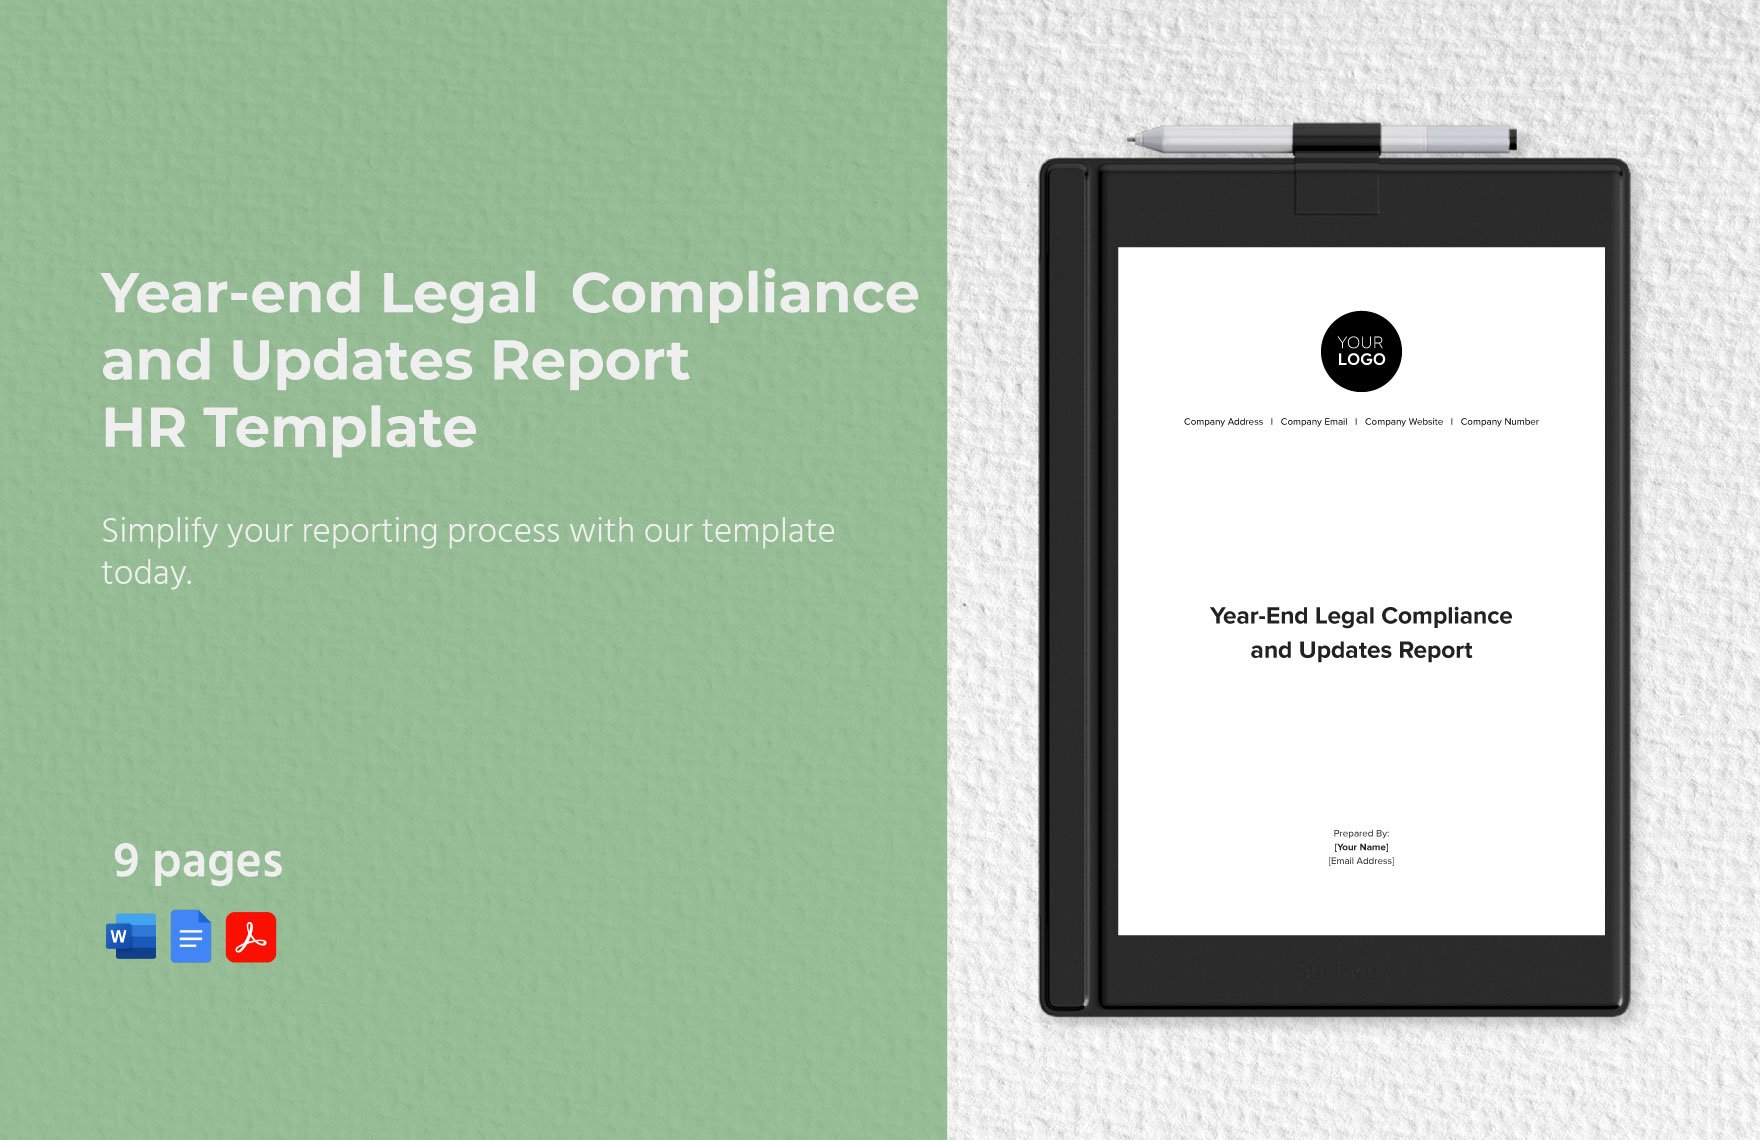 Year-end Legal Compliance and Updates Report HR Template